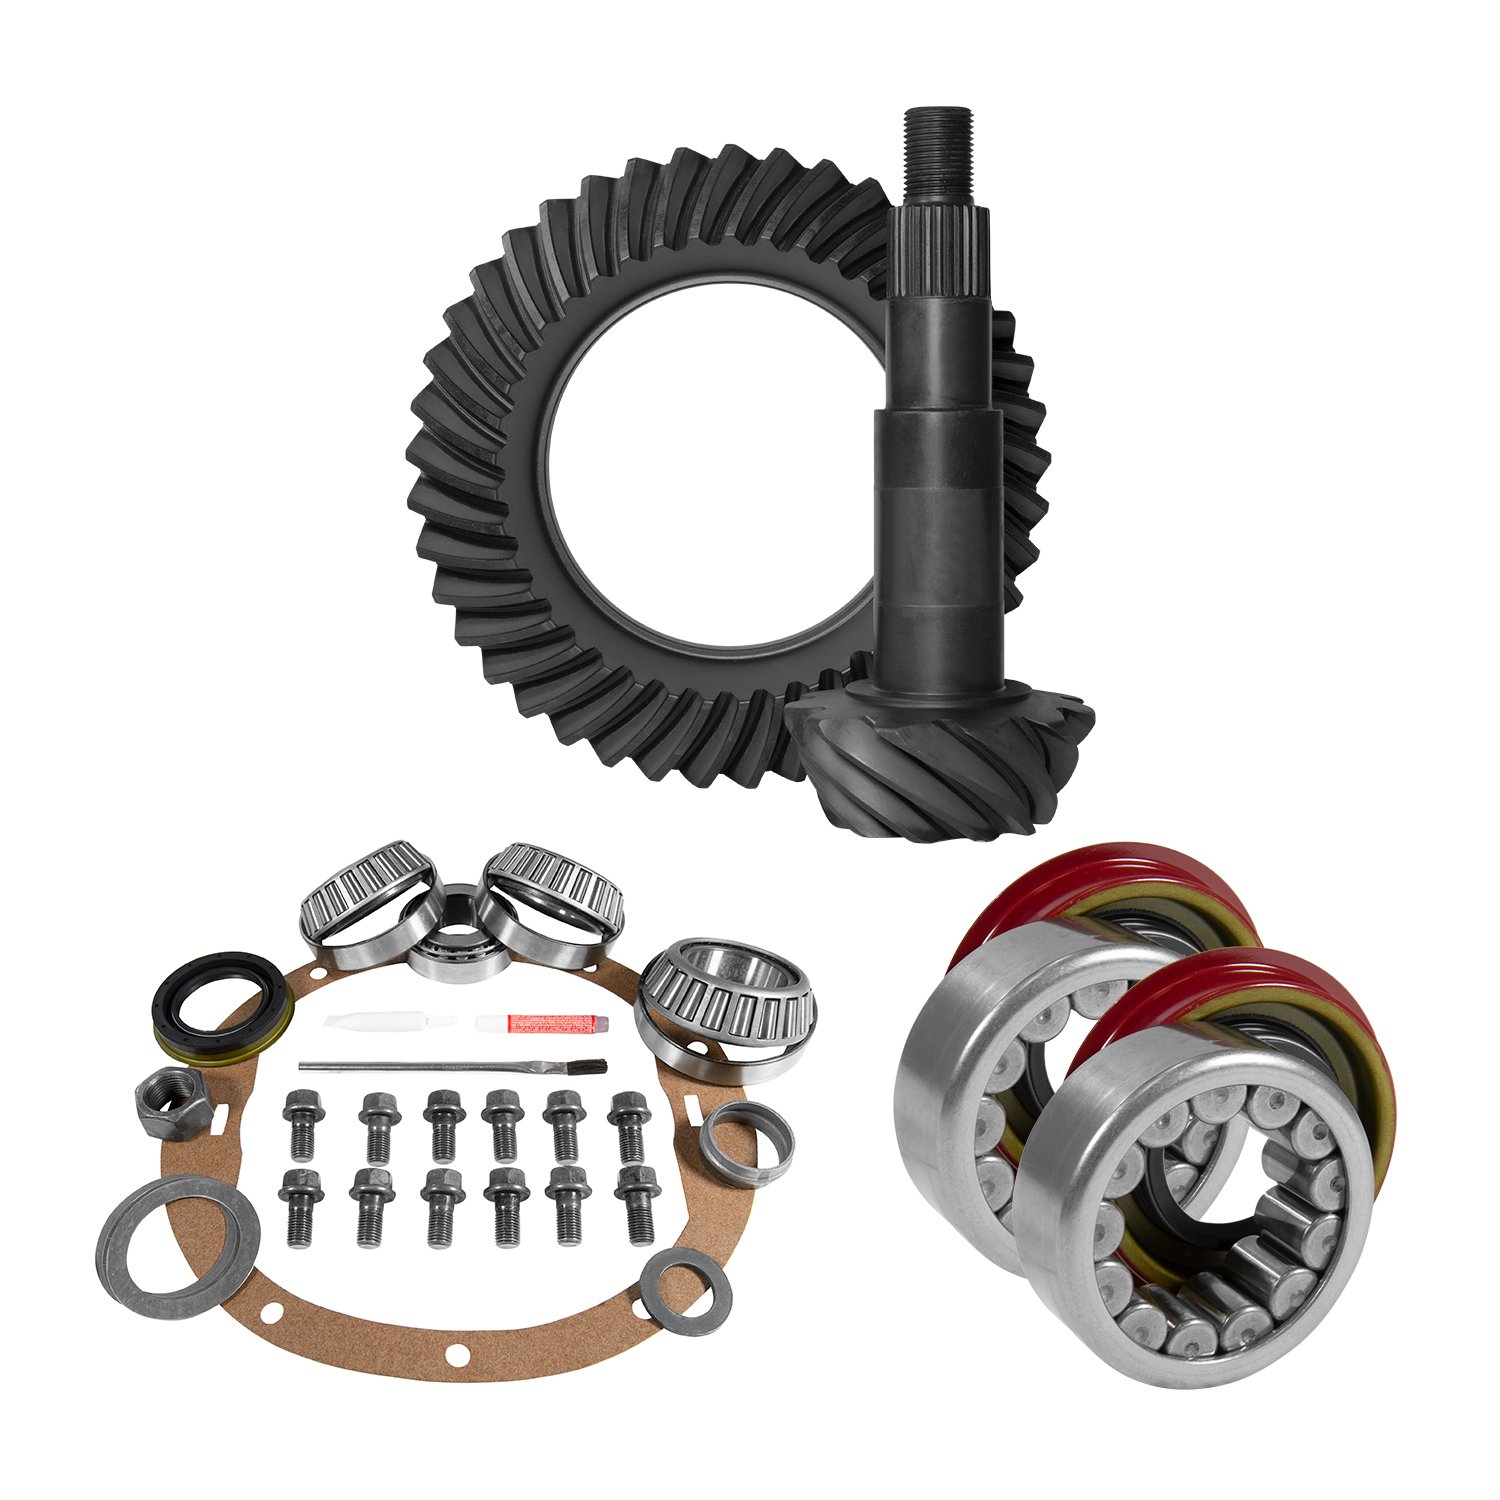 USA Standard 10720 8.5 in. GM 4.56 Rear Ring & Pinion Install Kit, Axle Bearings, 1.78 in. Case Journal